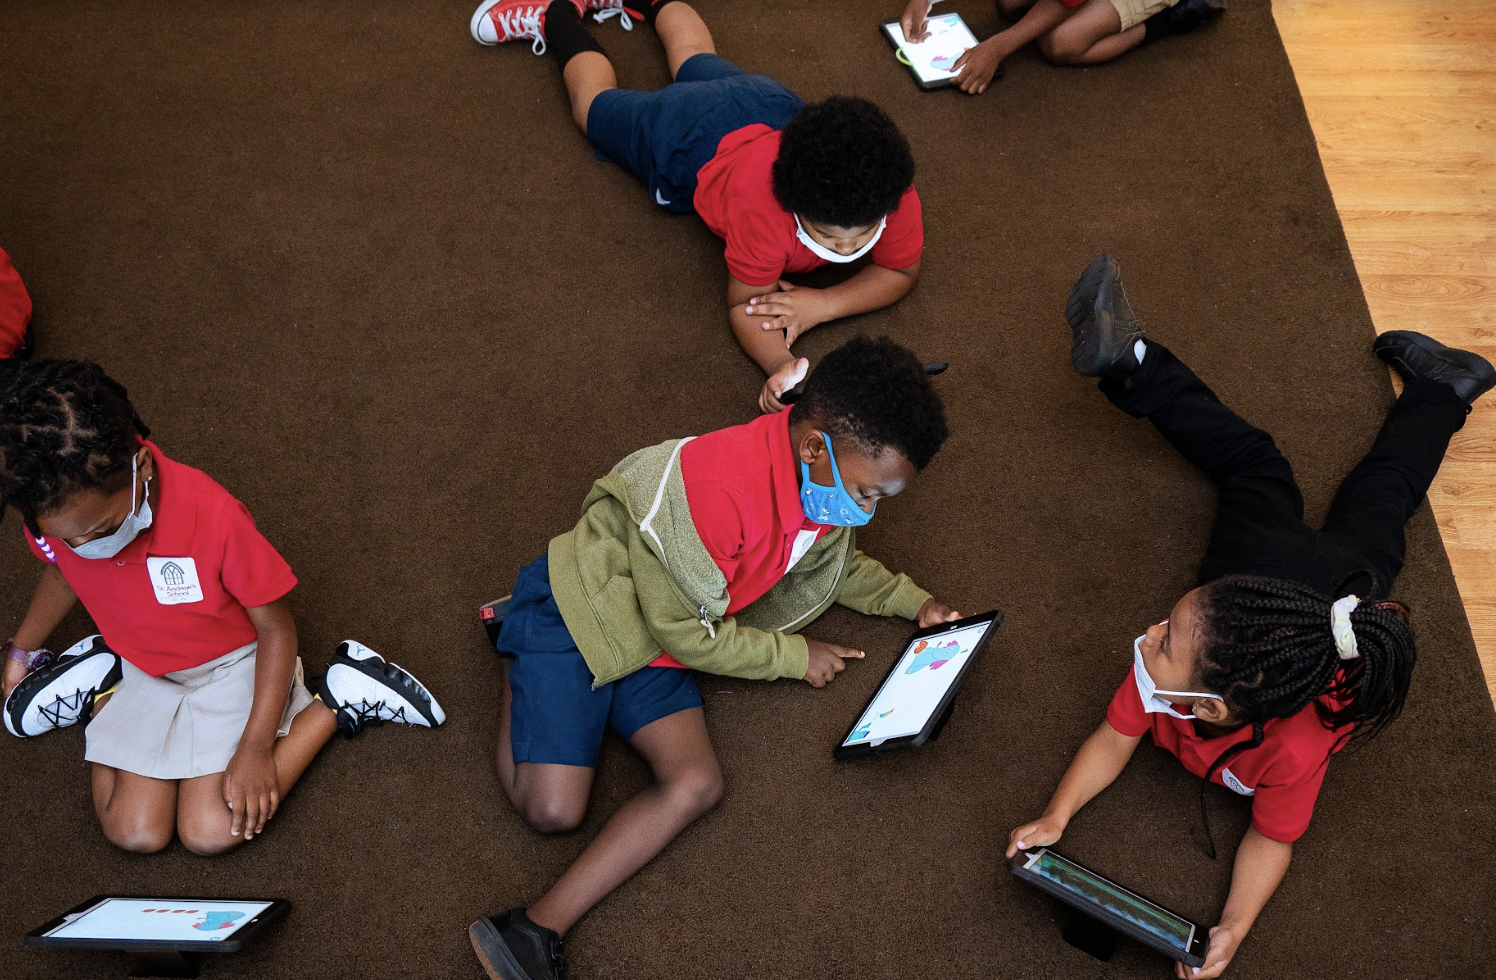 Kindergarten students who are spread out on the carpet, completing activities on their tablets.